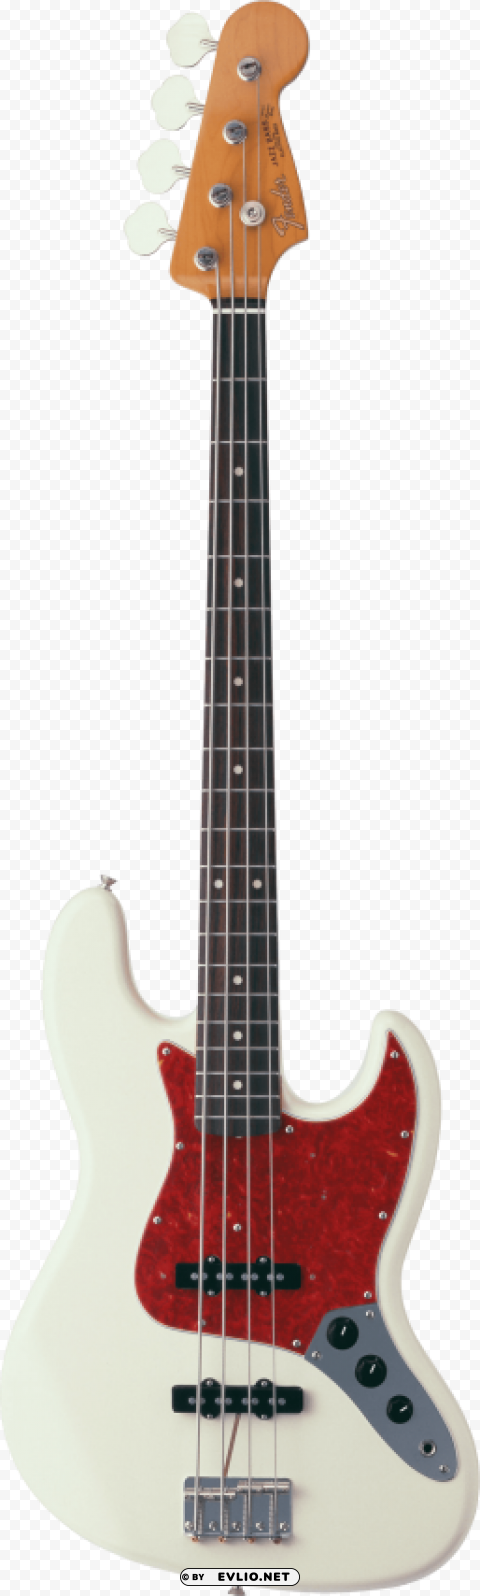 electric guitar Isolated Illustration in HighQuality Transparent PNG